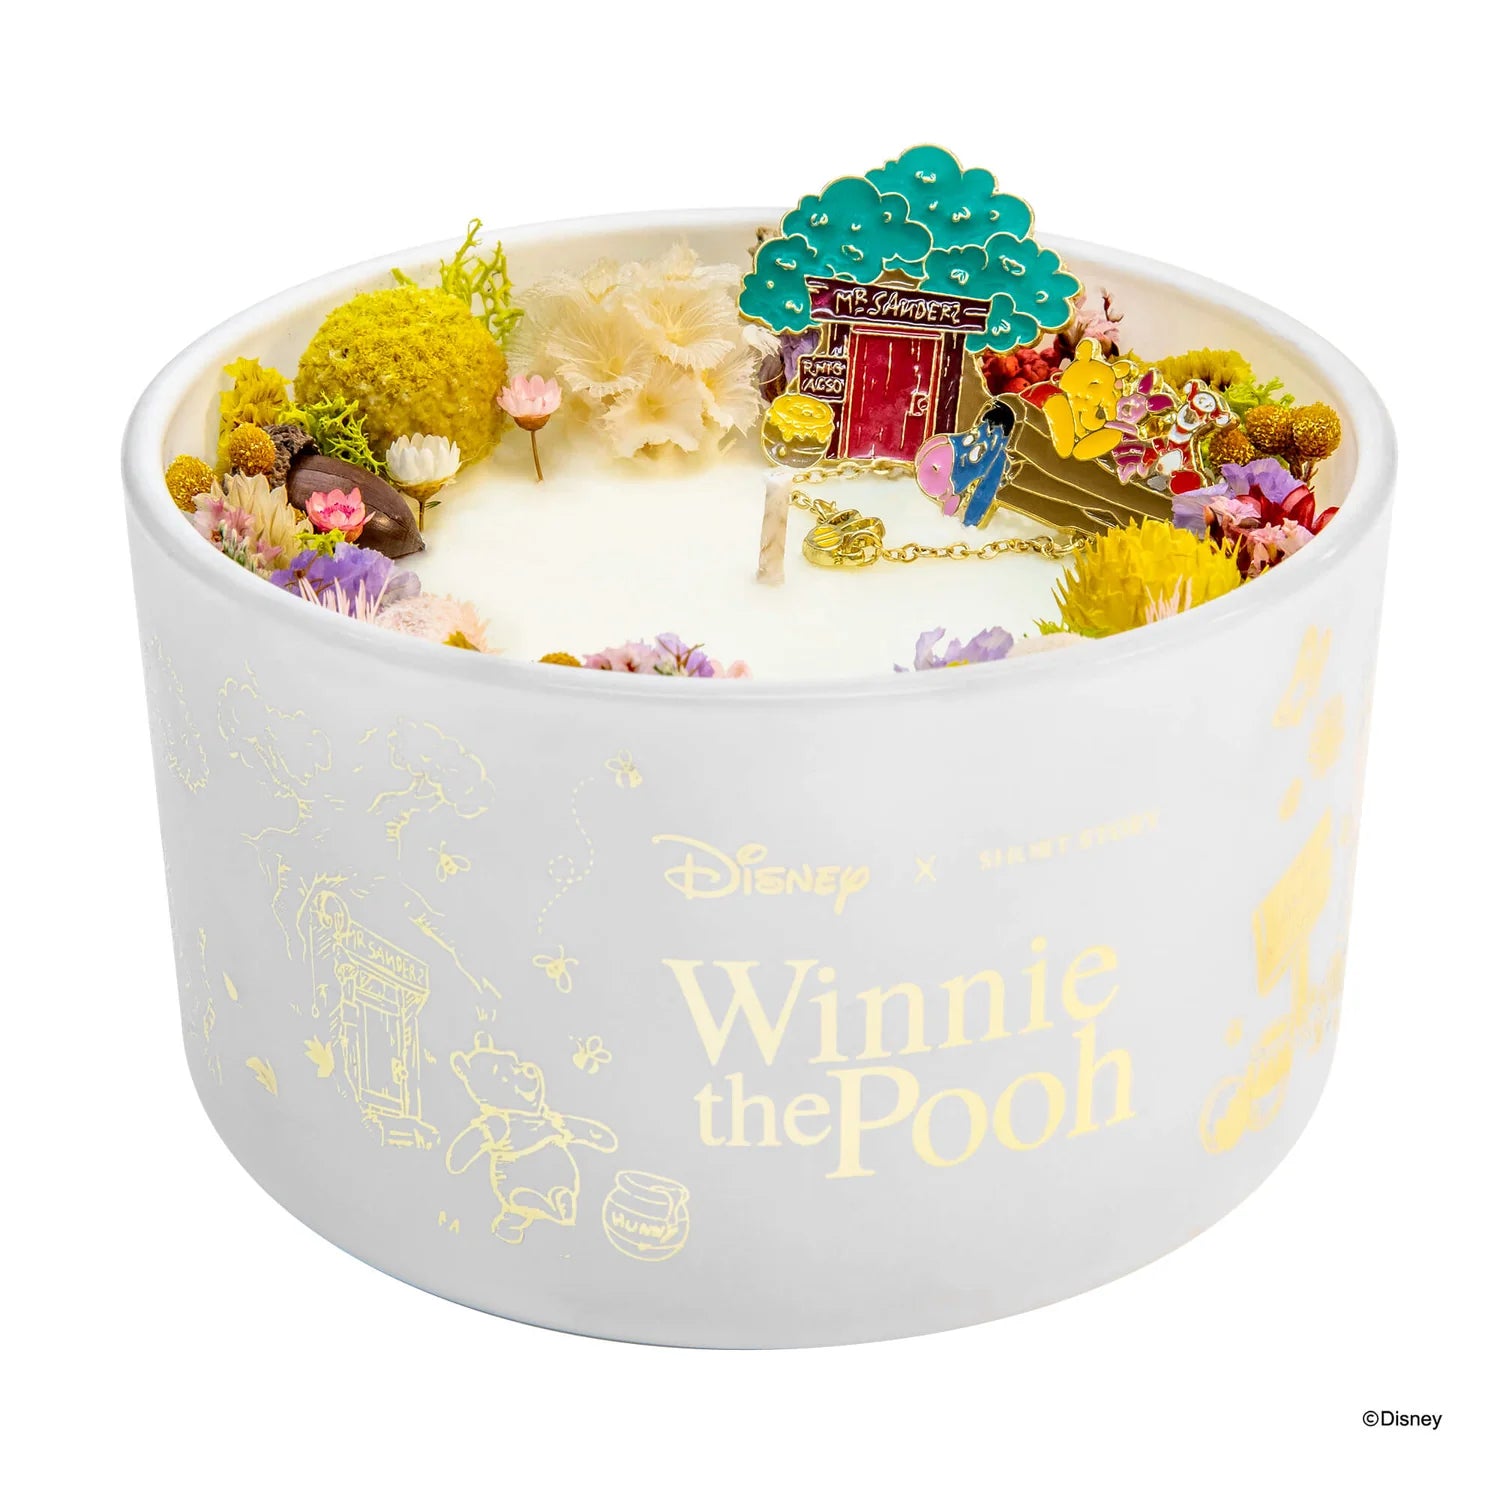 Short Story - Disney Winnie The Pooh 100 Acre Wood Luxe Candle